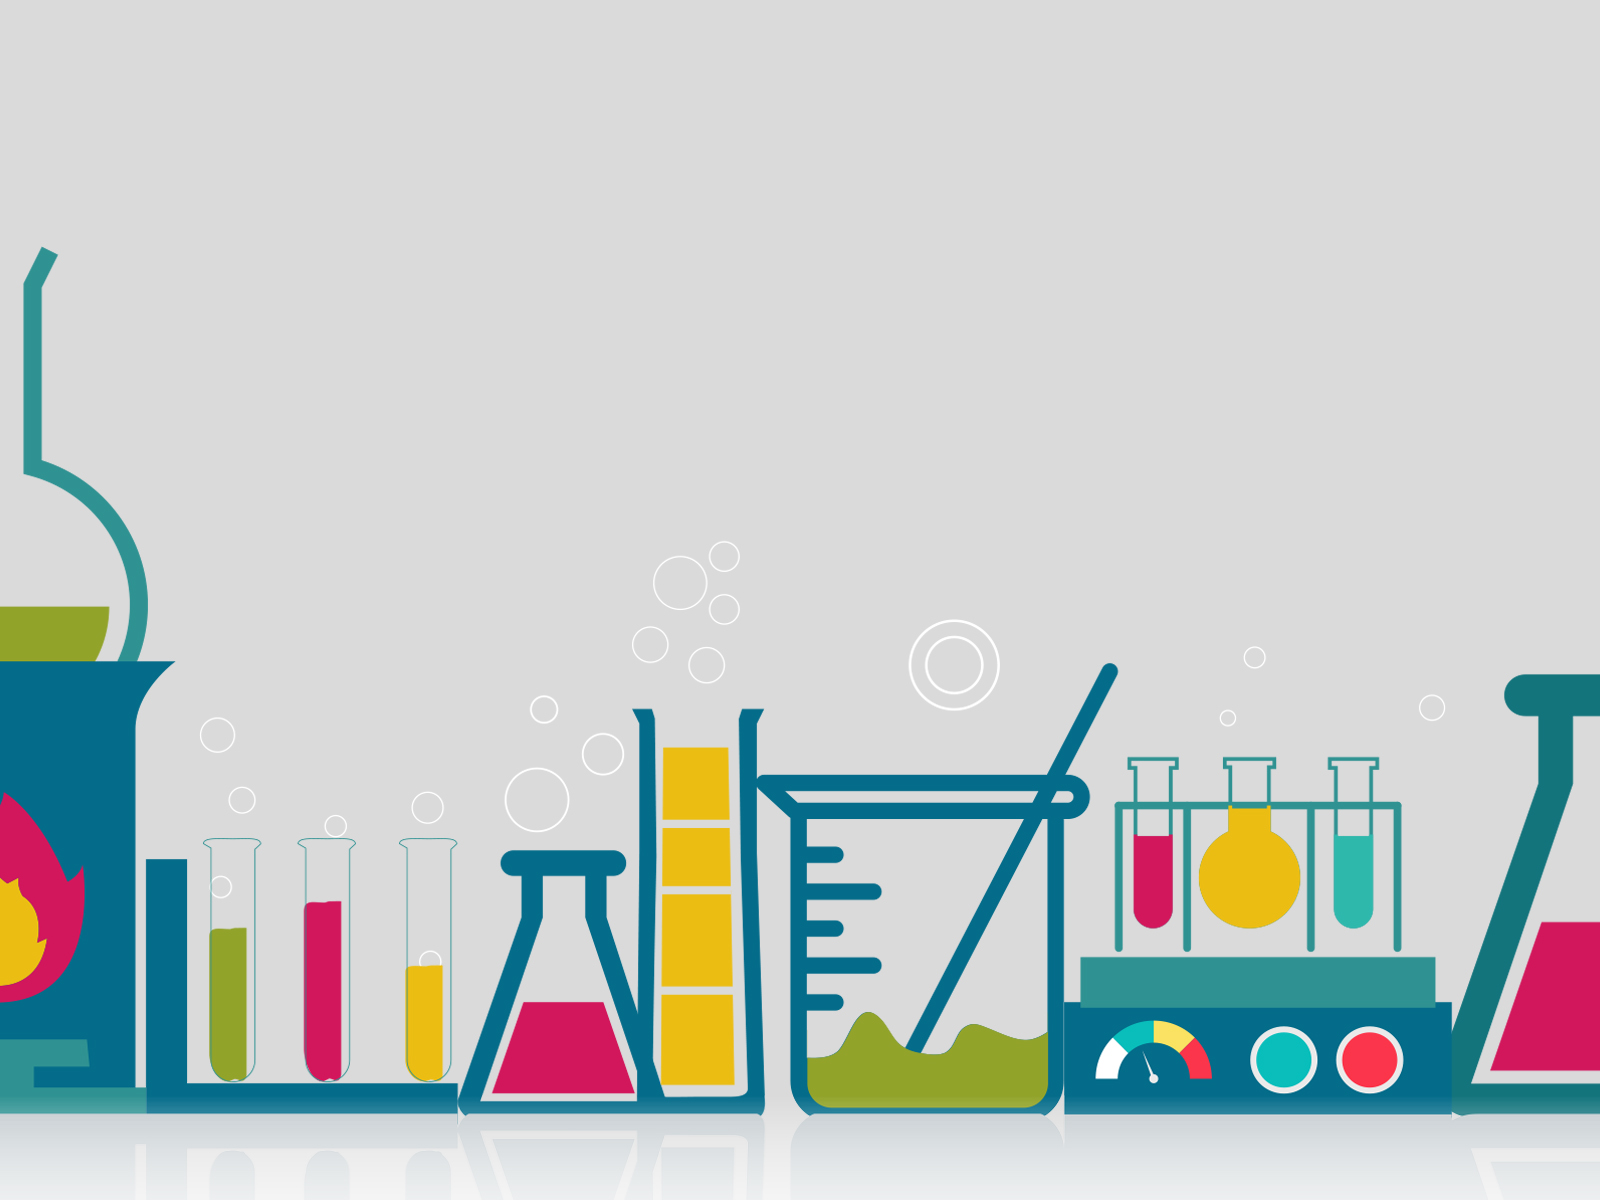 Chemistry Background Ppt - PowerPoint Backgrounds for Free ...